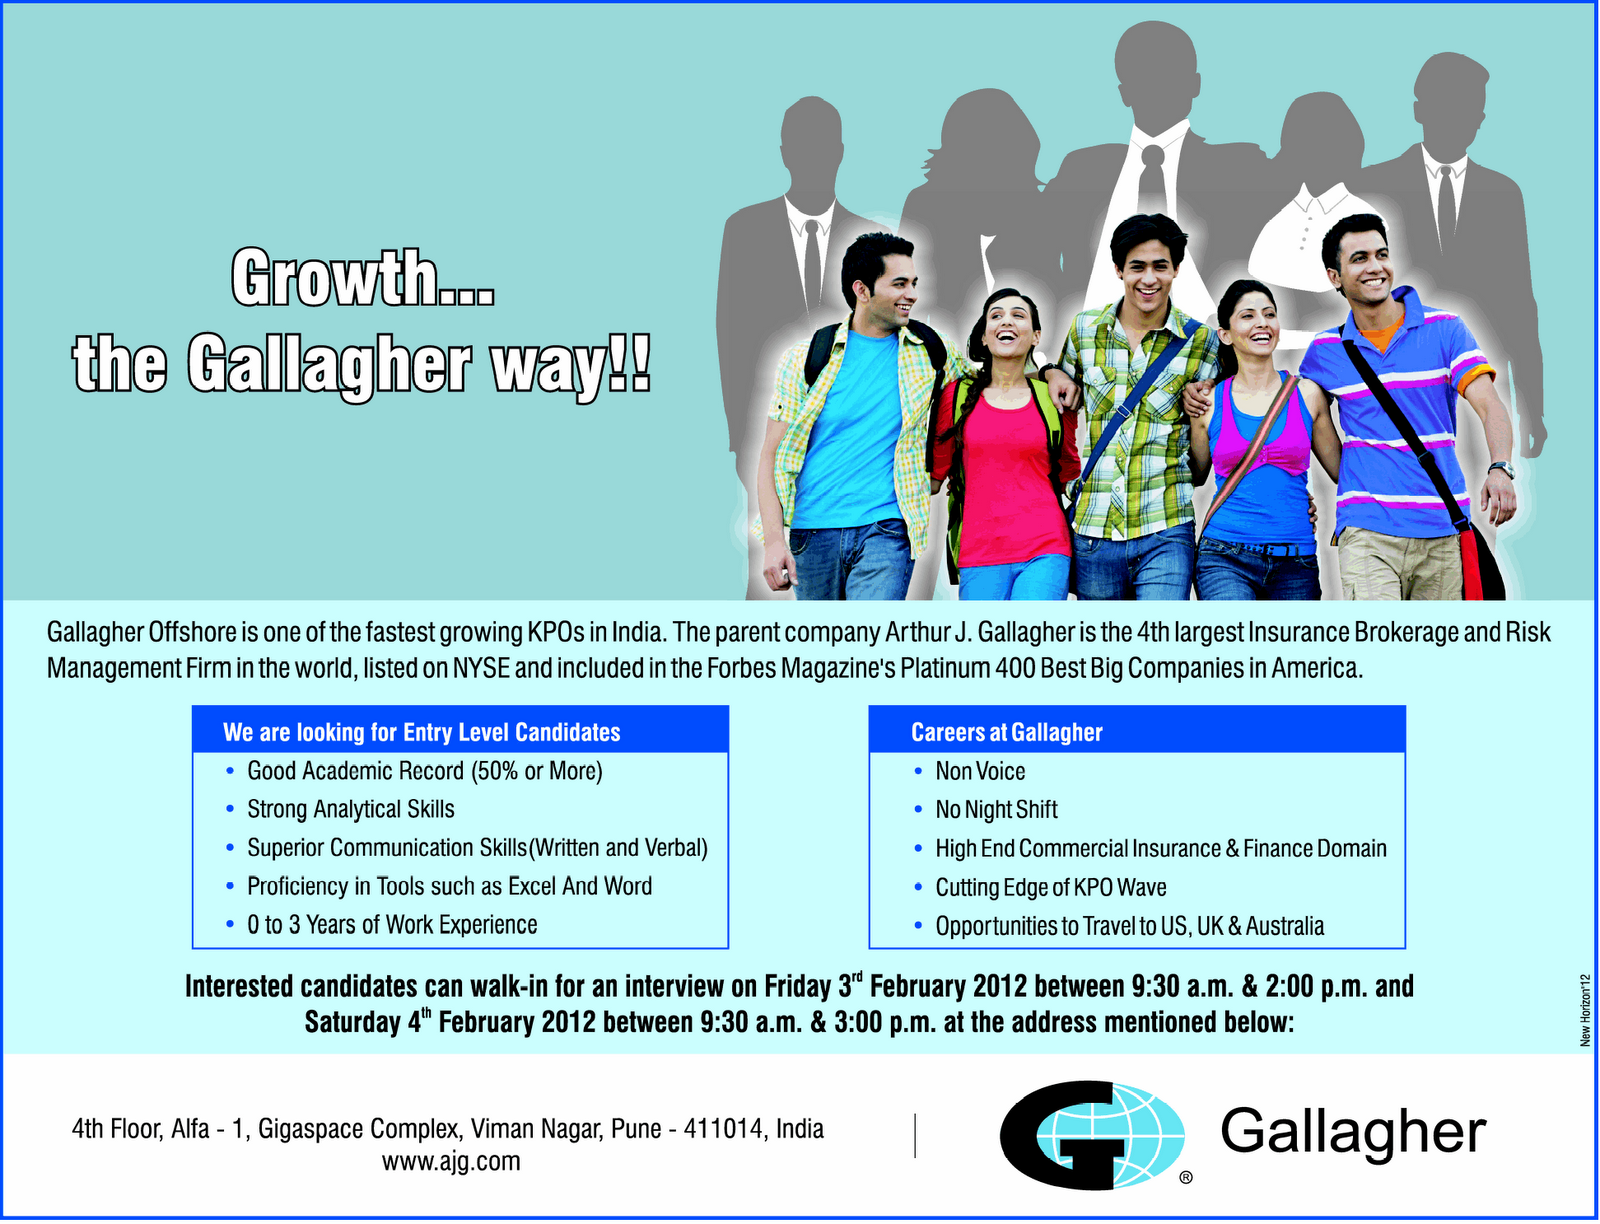 true-gift-walkin-interview-in-gallagher-at-pune-on-4th-february-2012